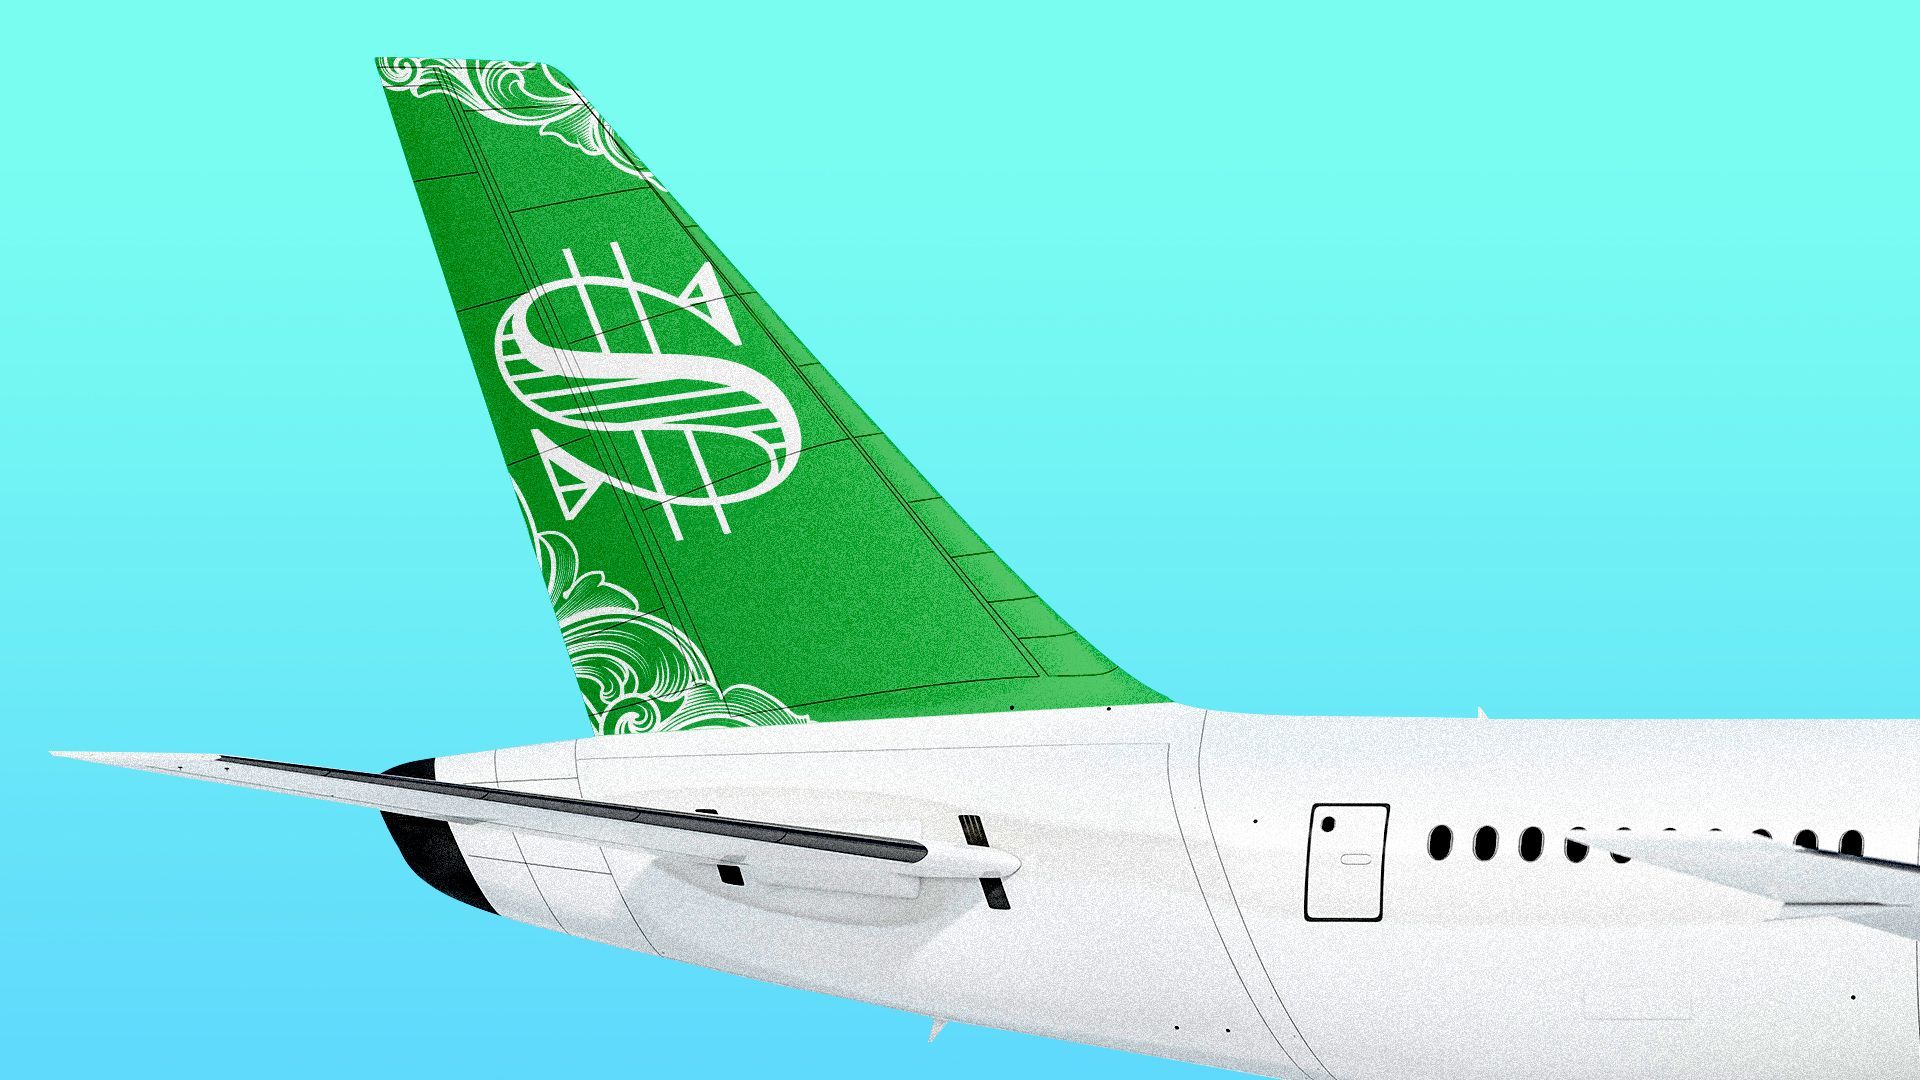 Illustration of an airplane tail design with a dollar bill sign on it.   